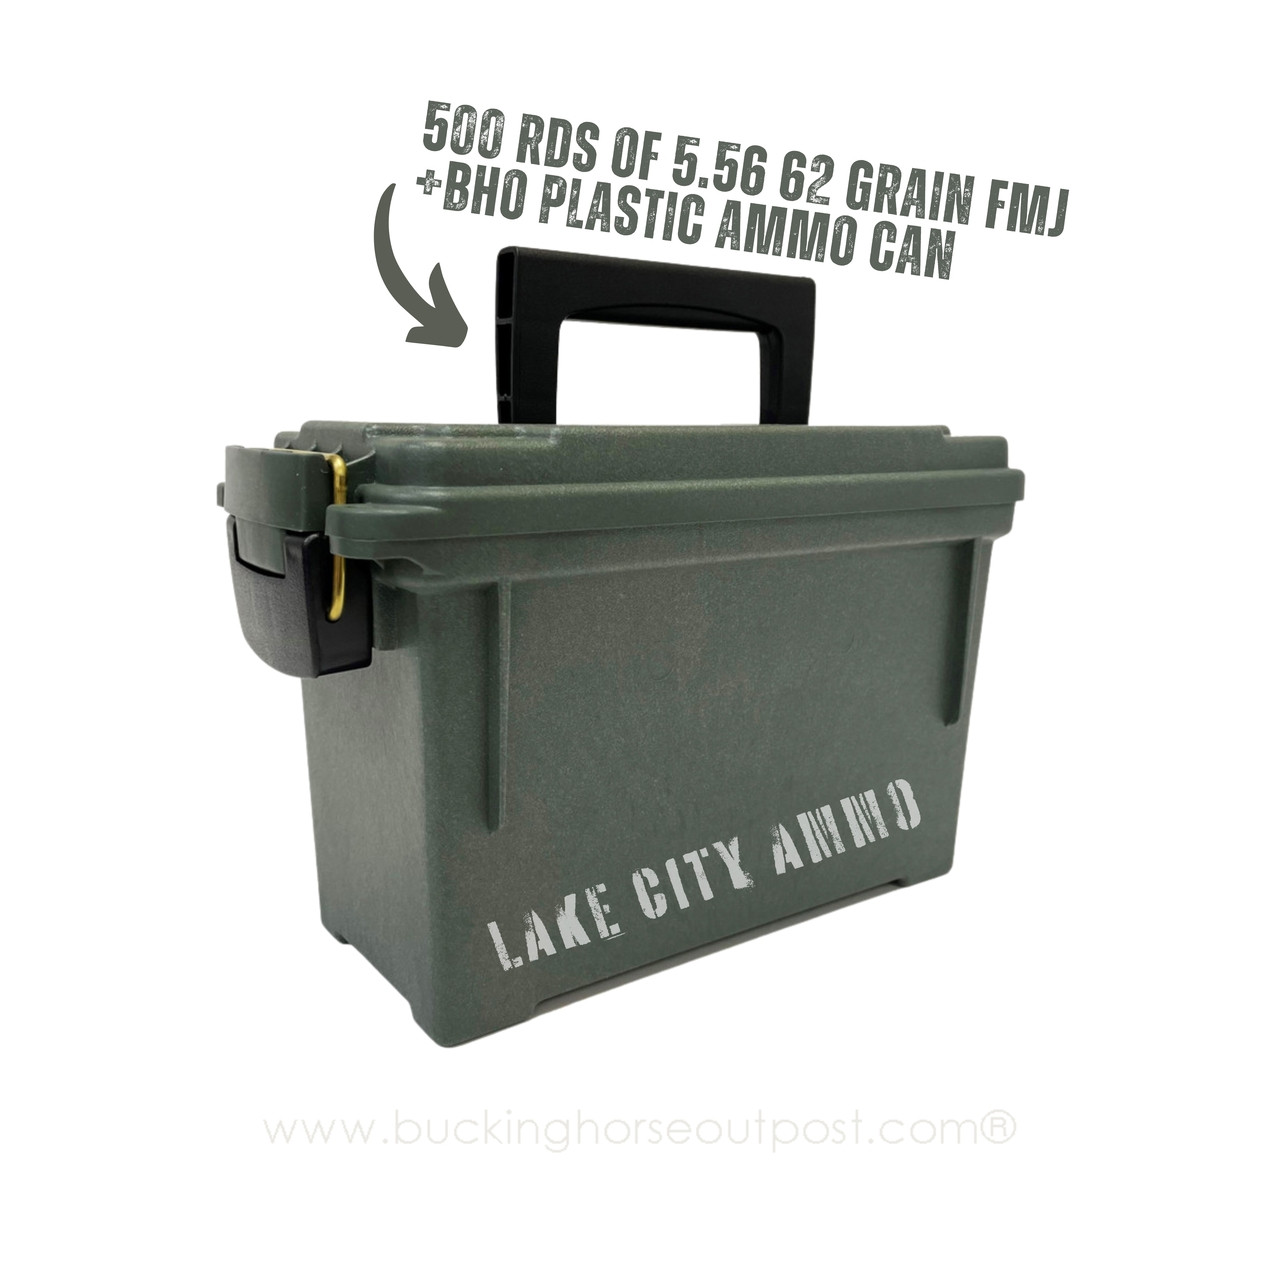 BHO Bundle #20 - Lake City M855 5.56X45MM NATO SS109 Green Tip Full Metal Jacket 62 Grain 30cal Plastic Ammo Can 500rds Per Can